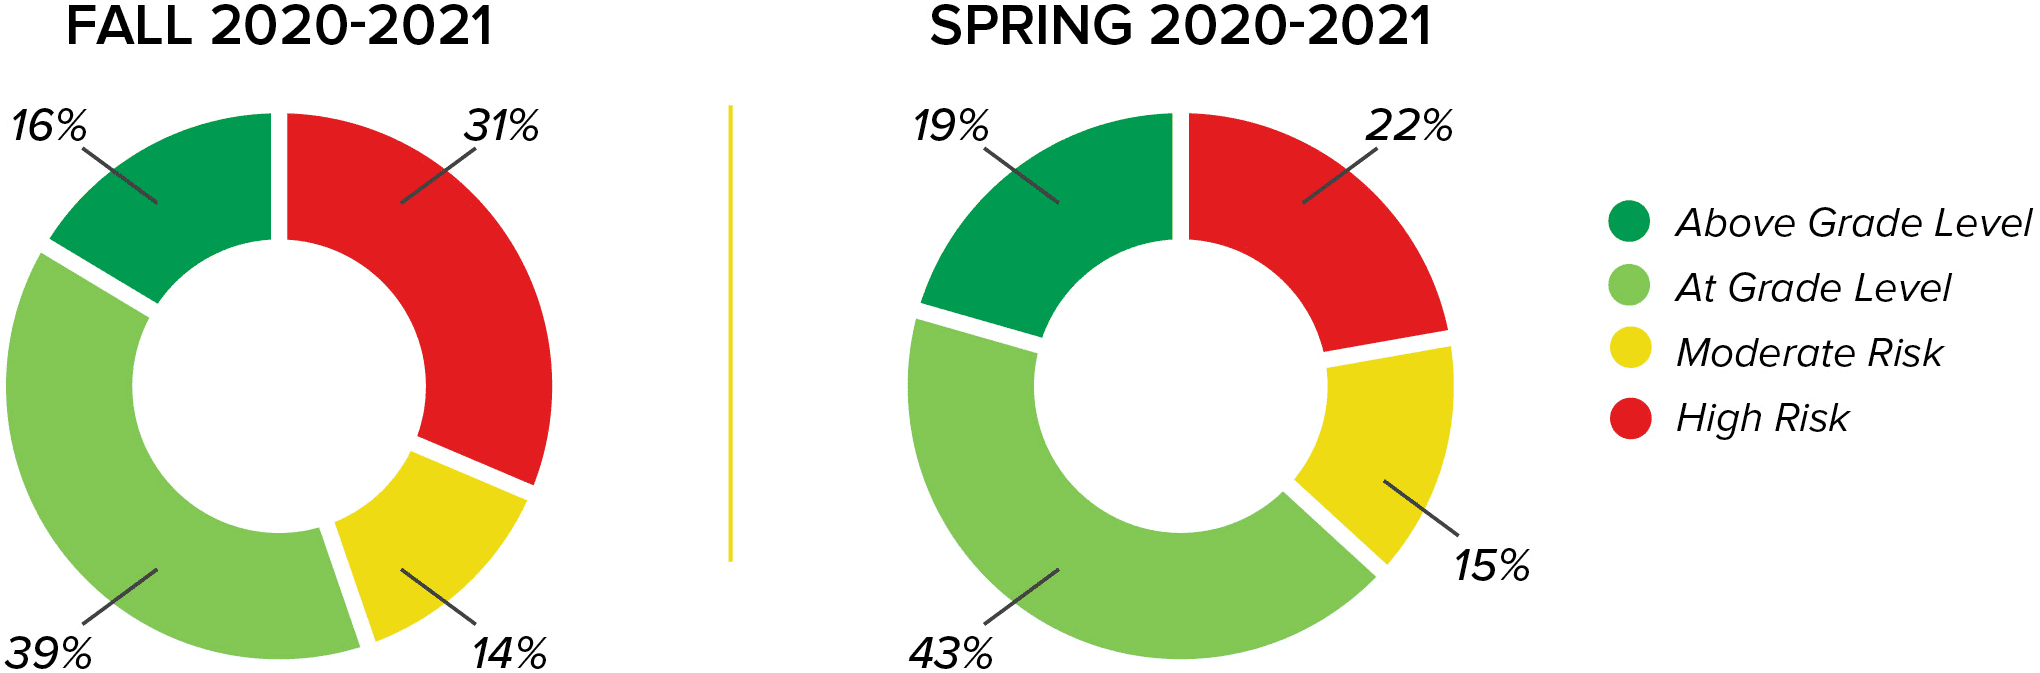 Pie charts showing the 2020-2021 Literacy Risk Assessment